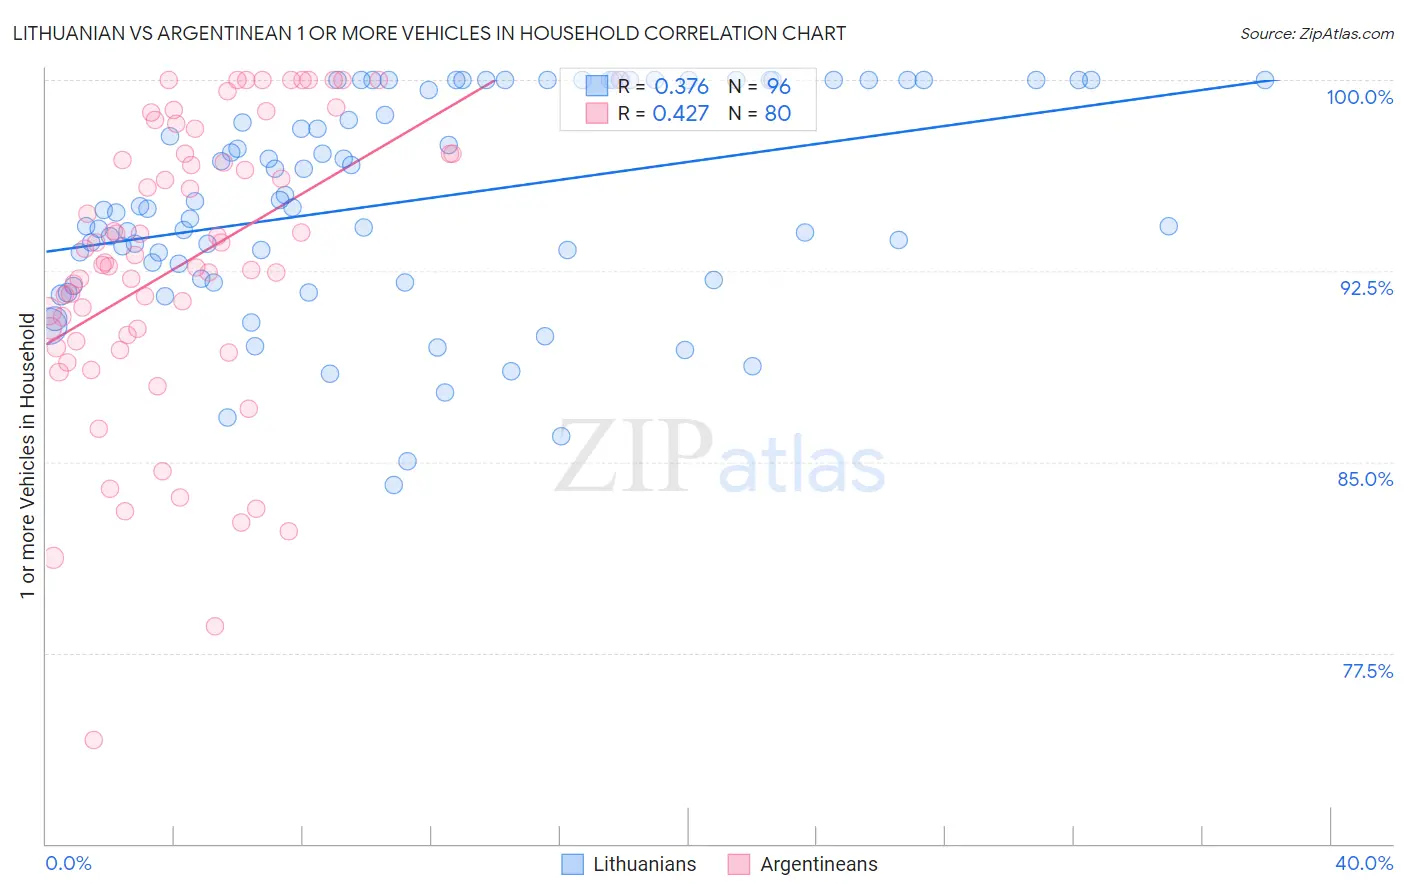 Lithuanian vs Argentinean 1 or more Vehicles in Household